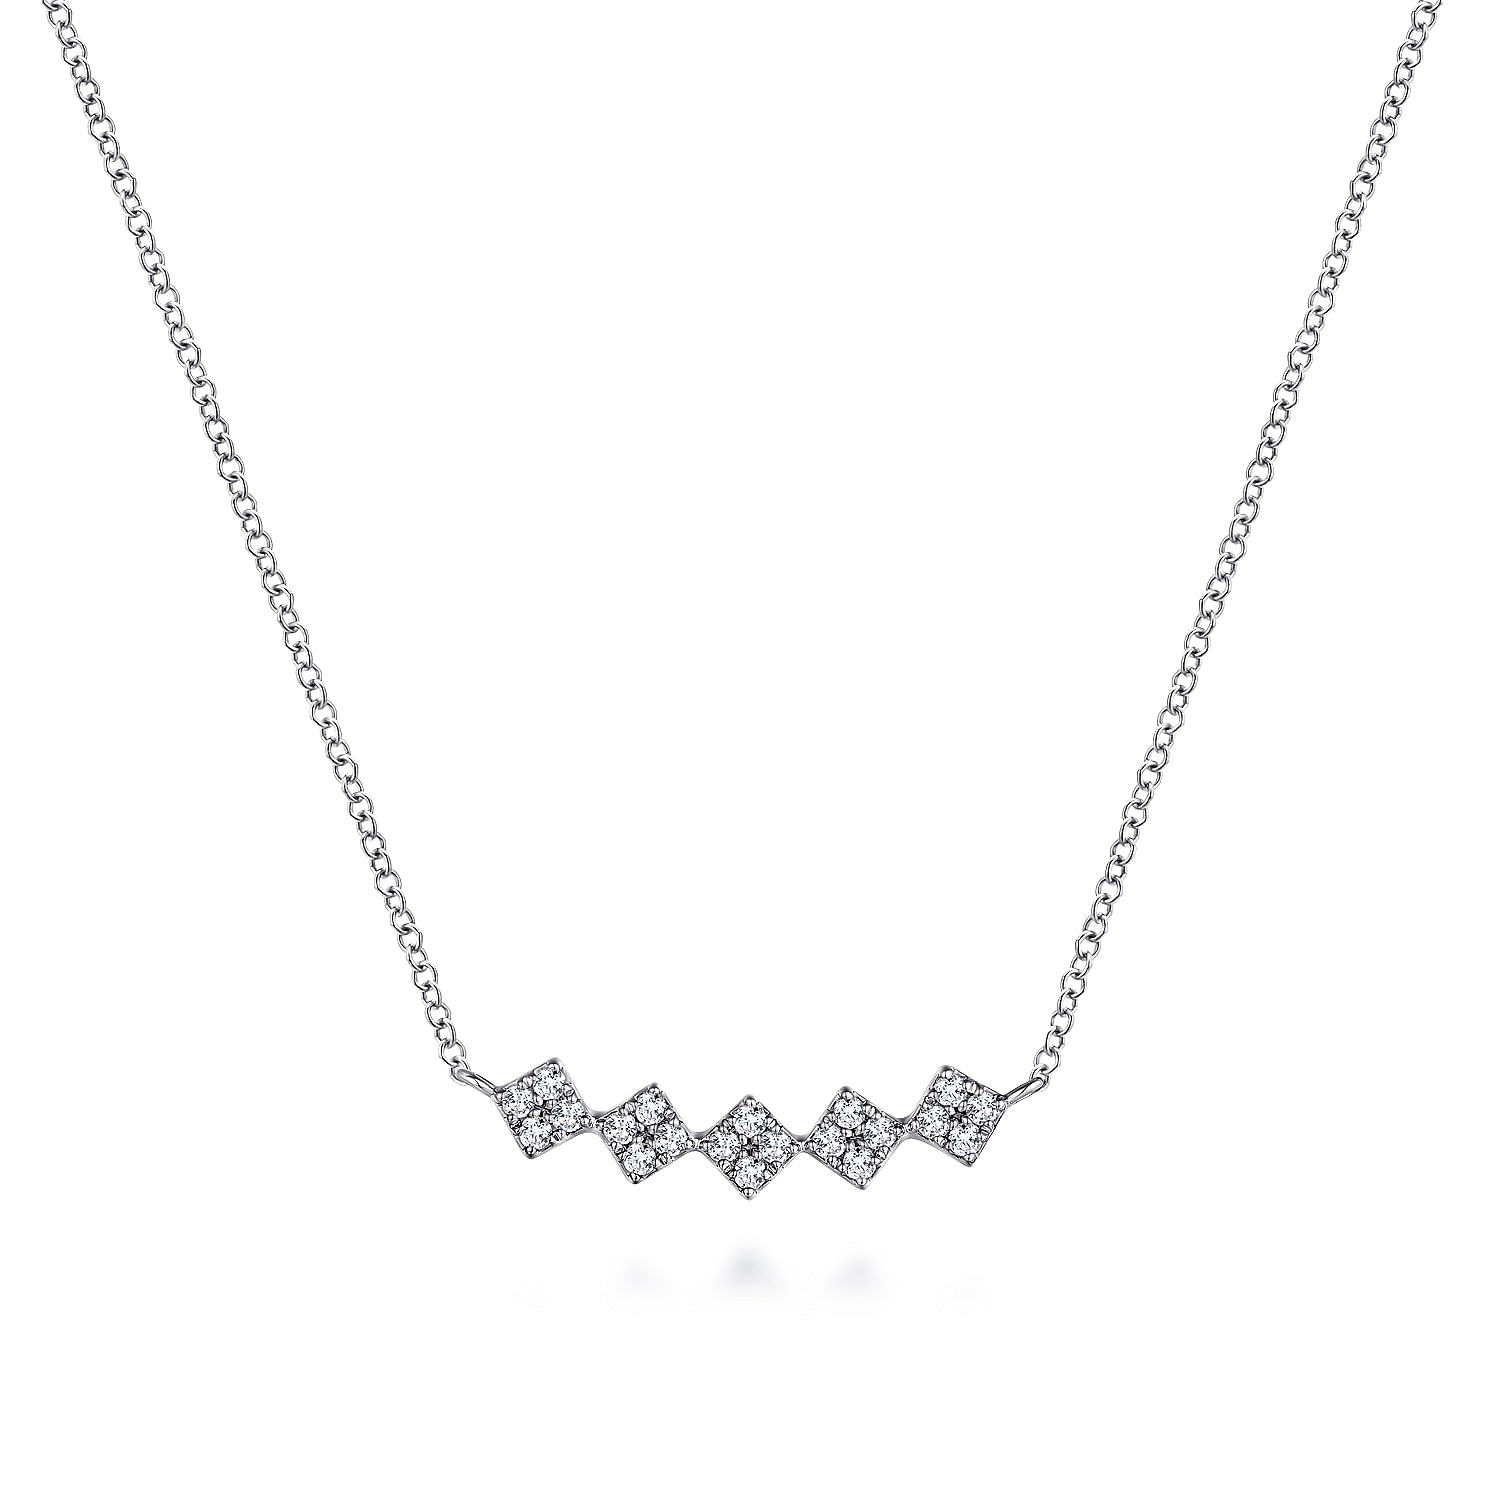 14K White Gold Square Station Diamond Pave Curved Bar Necklace